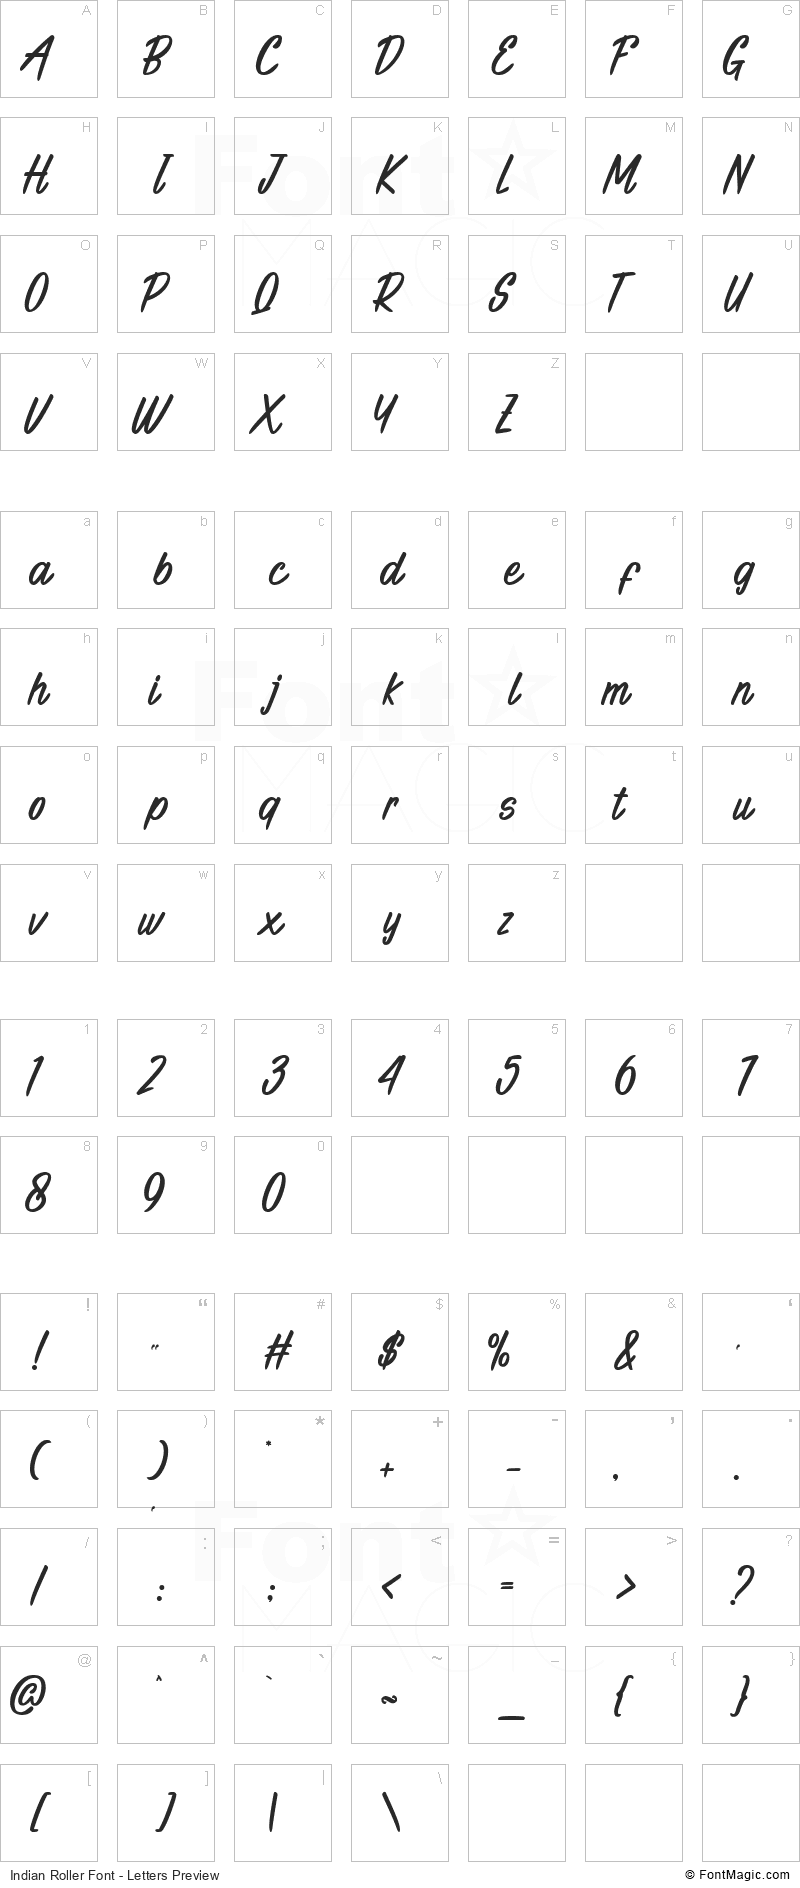 Indian Roller Font - All Latters Preview Chart